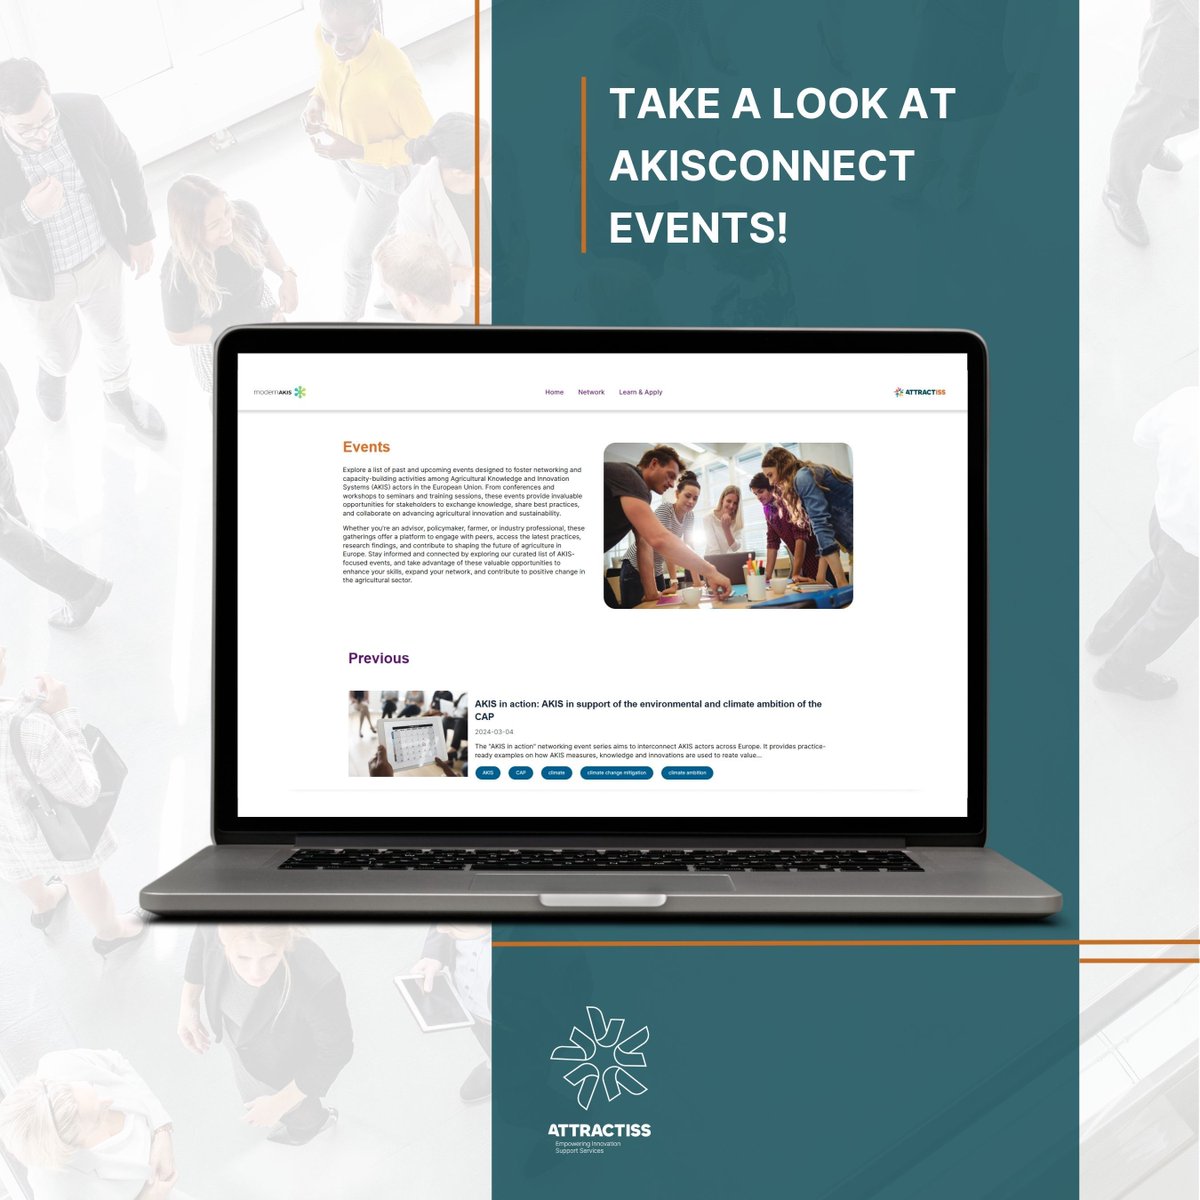 📅 Explore AKISConnect Events page! 

🌱 Connect with AKIS actors in the EU at conferences, workshops, and more. Shape the future of agriculture in Europe! 

👉 Don't miss out, check it here: buff.ly/3xjaVOu 

#AKIS #Agriculture #Networking